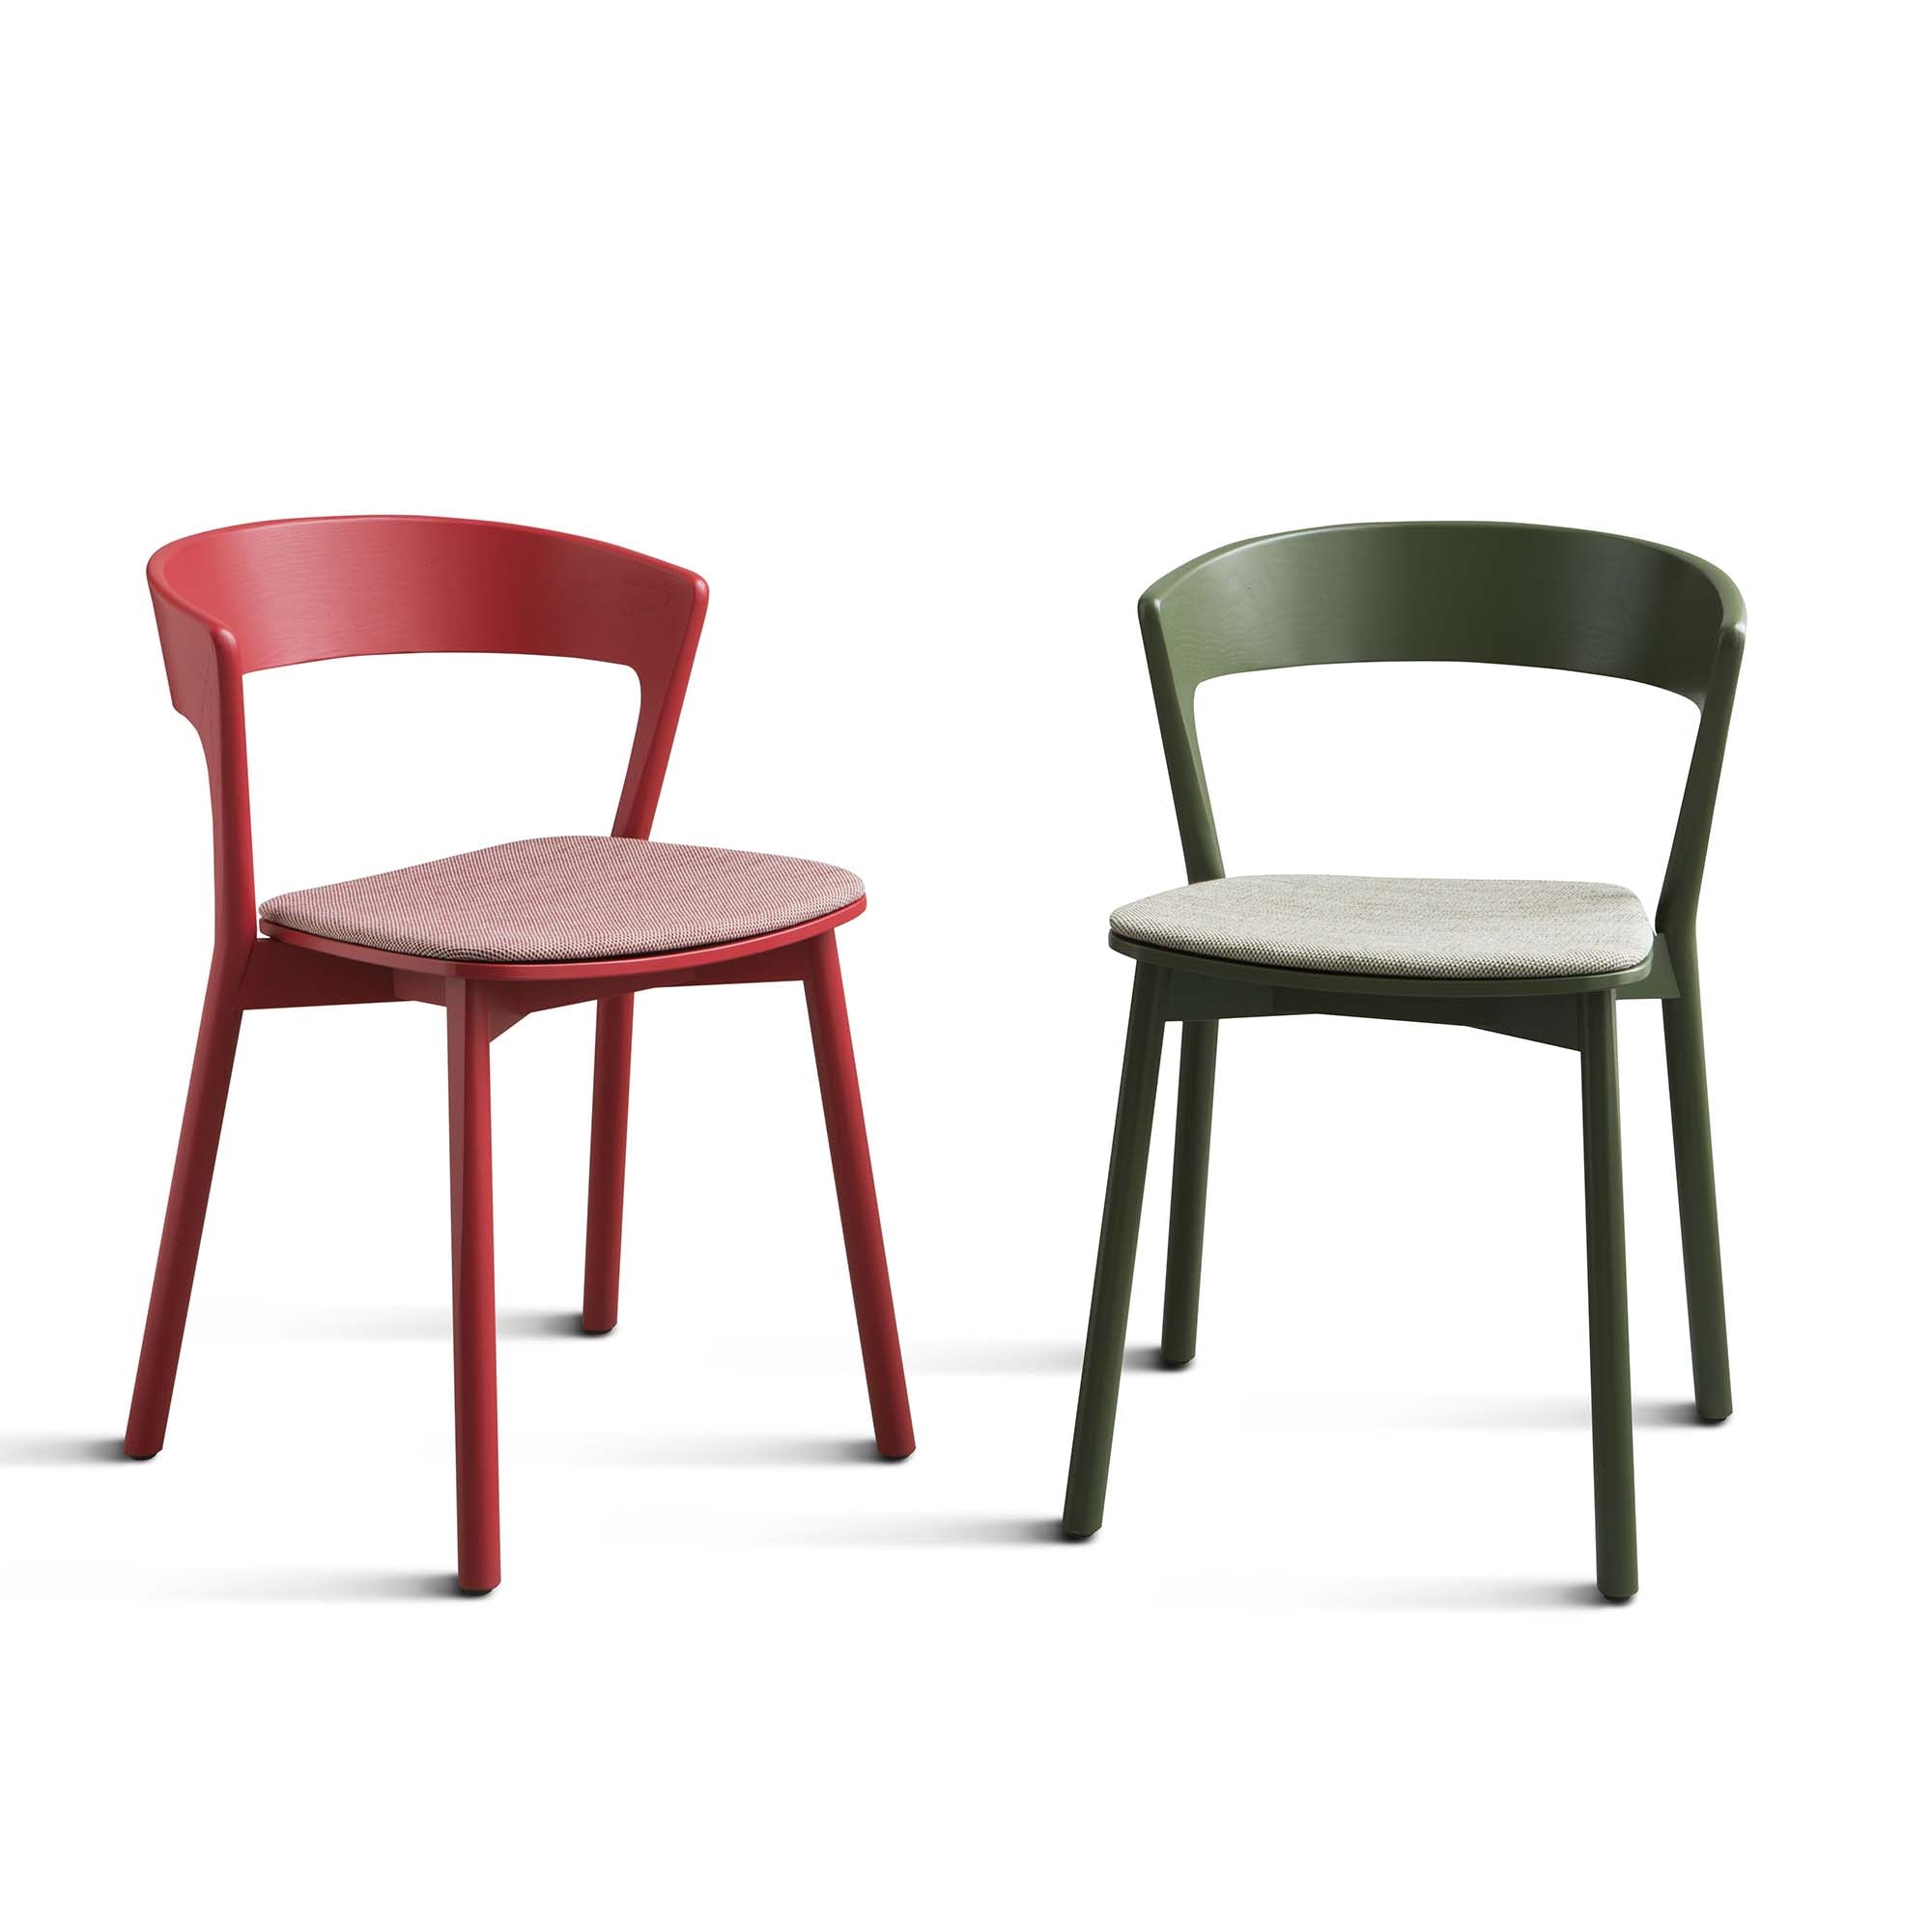 EDITH IMB Chair red and green